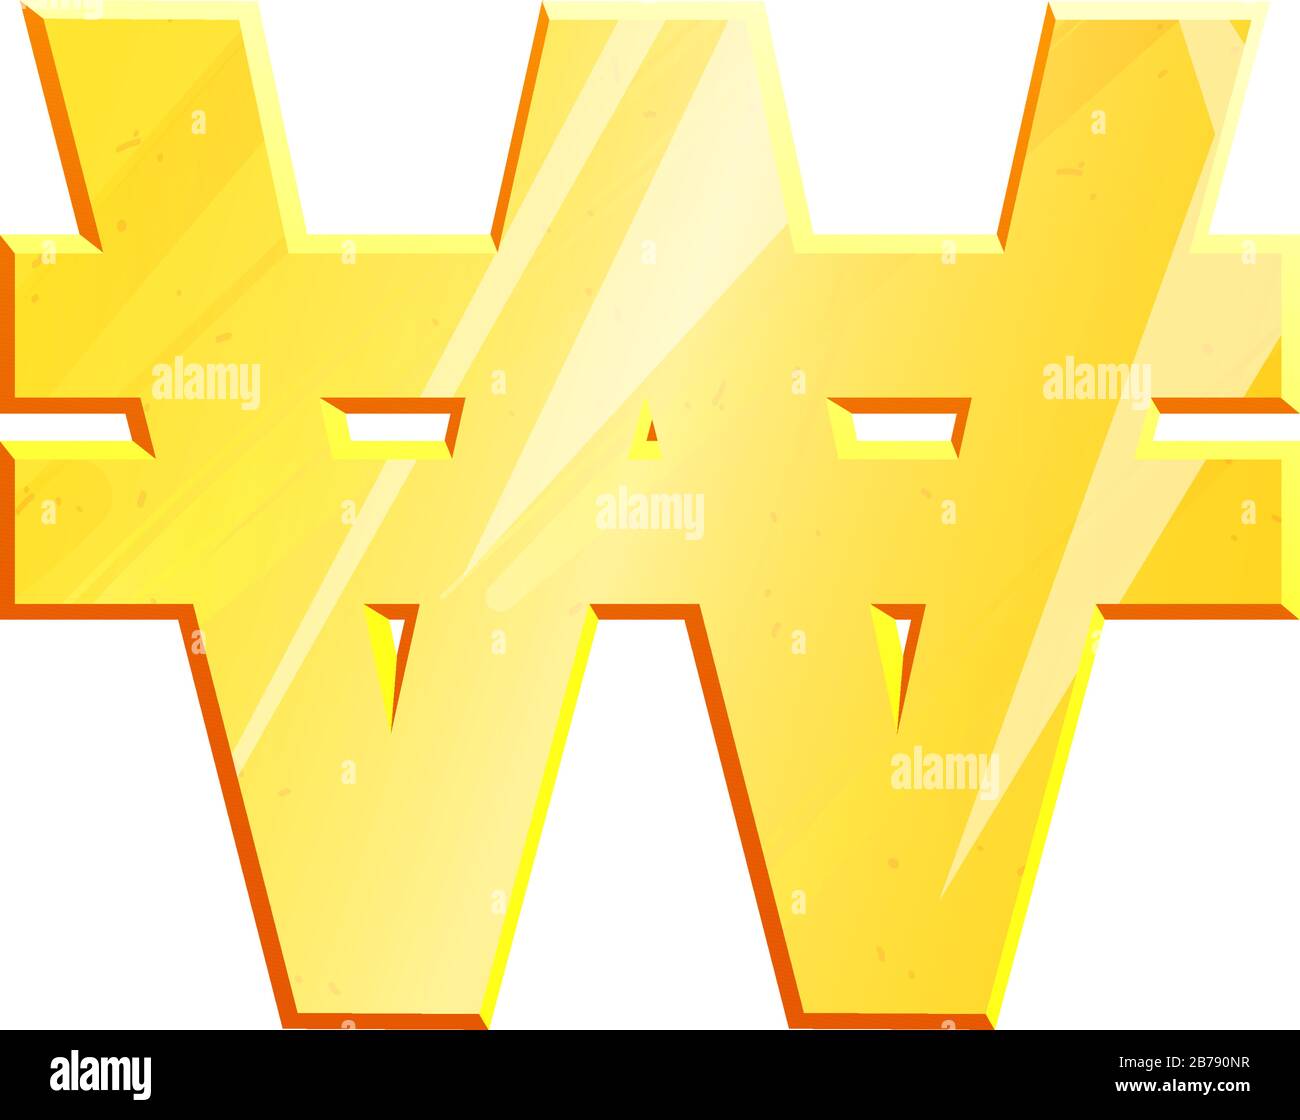 KRW Golden won symbol on white background. Finance investment concept. Exchange South Korean currency Money banking illustration. Business income earnings. Financial sign stock vector. Stock Vector